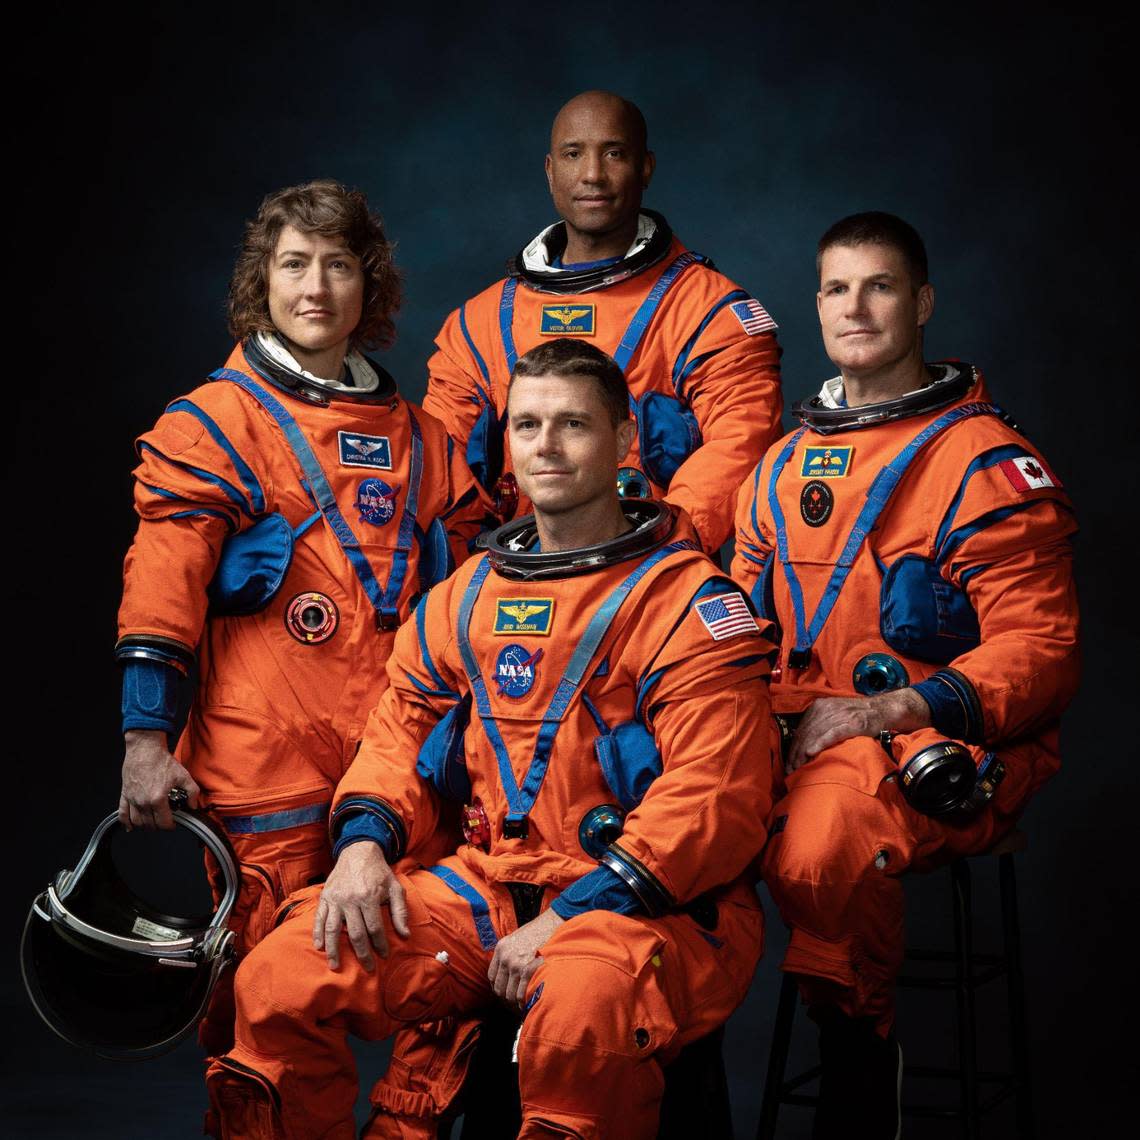 The Artemis II crew will go to the moon for the first time since 1972. They are, clockwise from the top, Victor Glover, pilot; Jeremy Hansen, mission specialist; Reid Wiseman, commander; and Christina Koch, mission specialist.